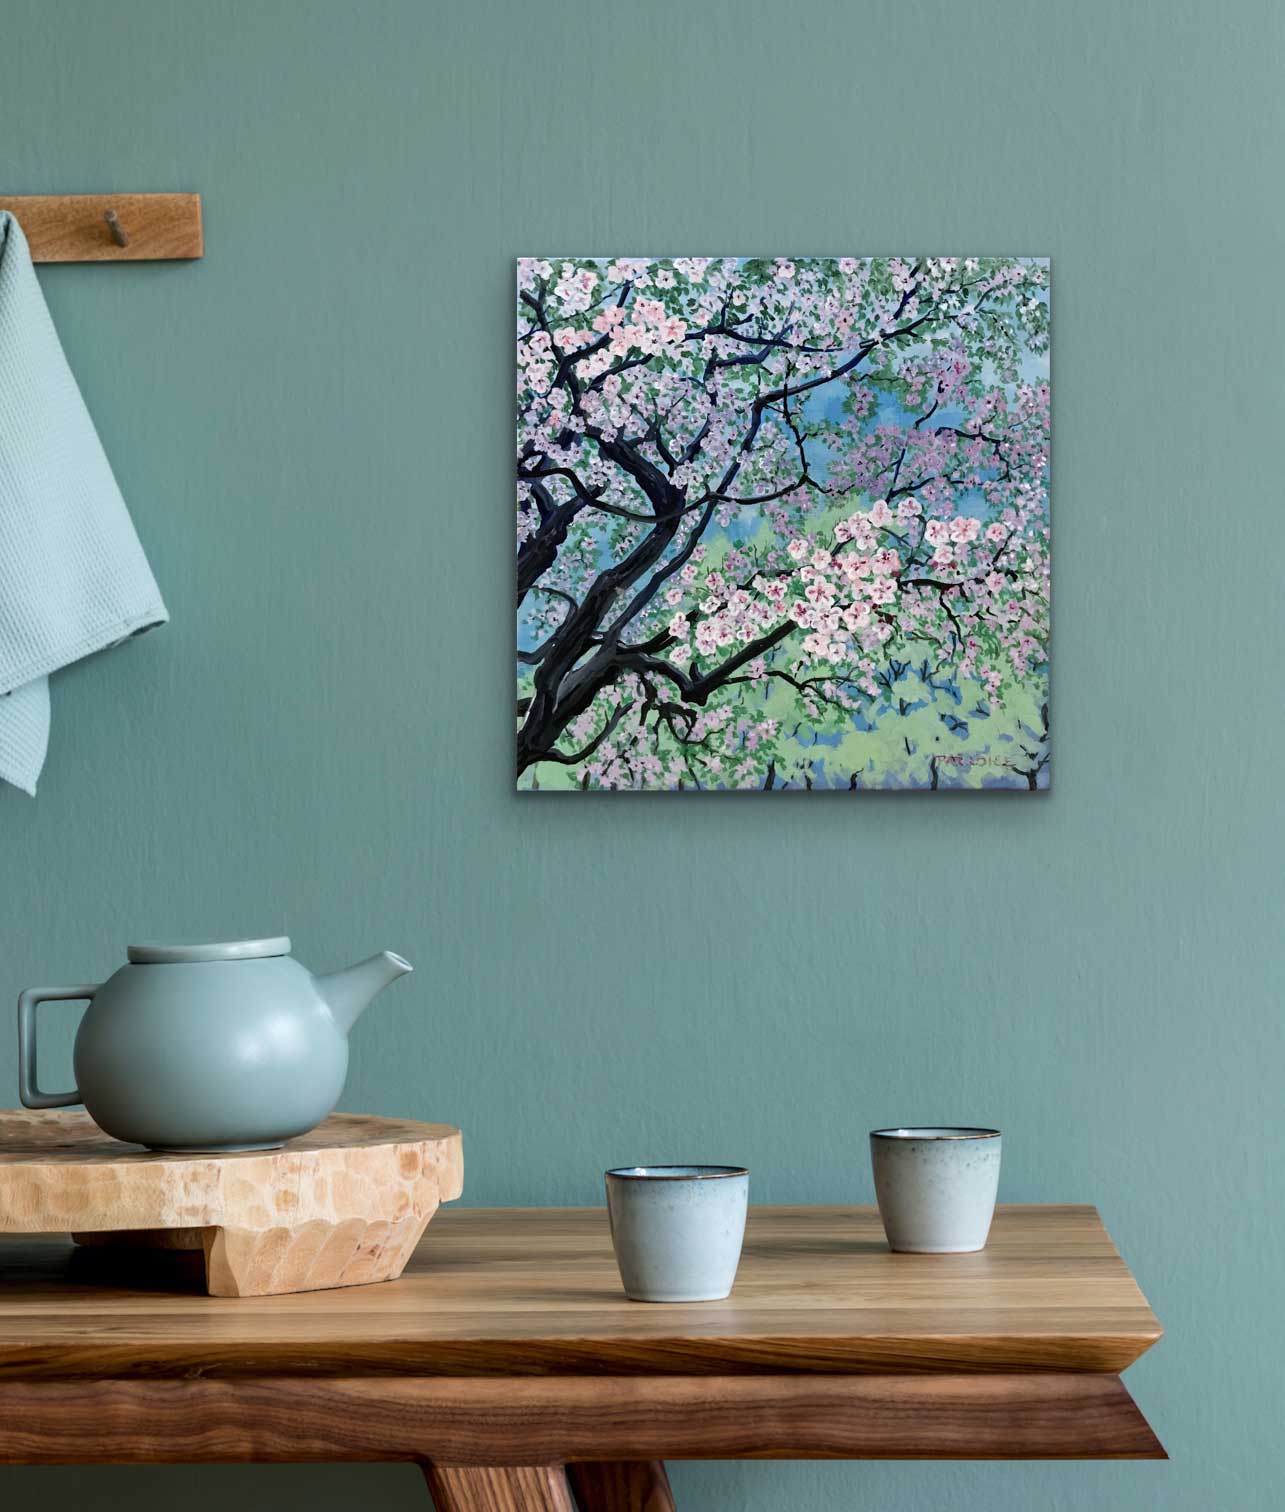 Blossom tree, apple orchard blooming flowers, original painting by a professional canadian landscape artist. visual art ready to hang on your wall.